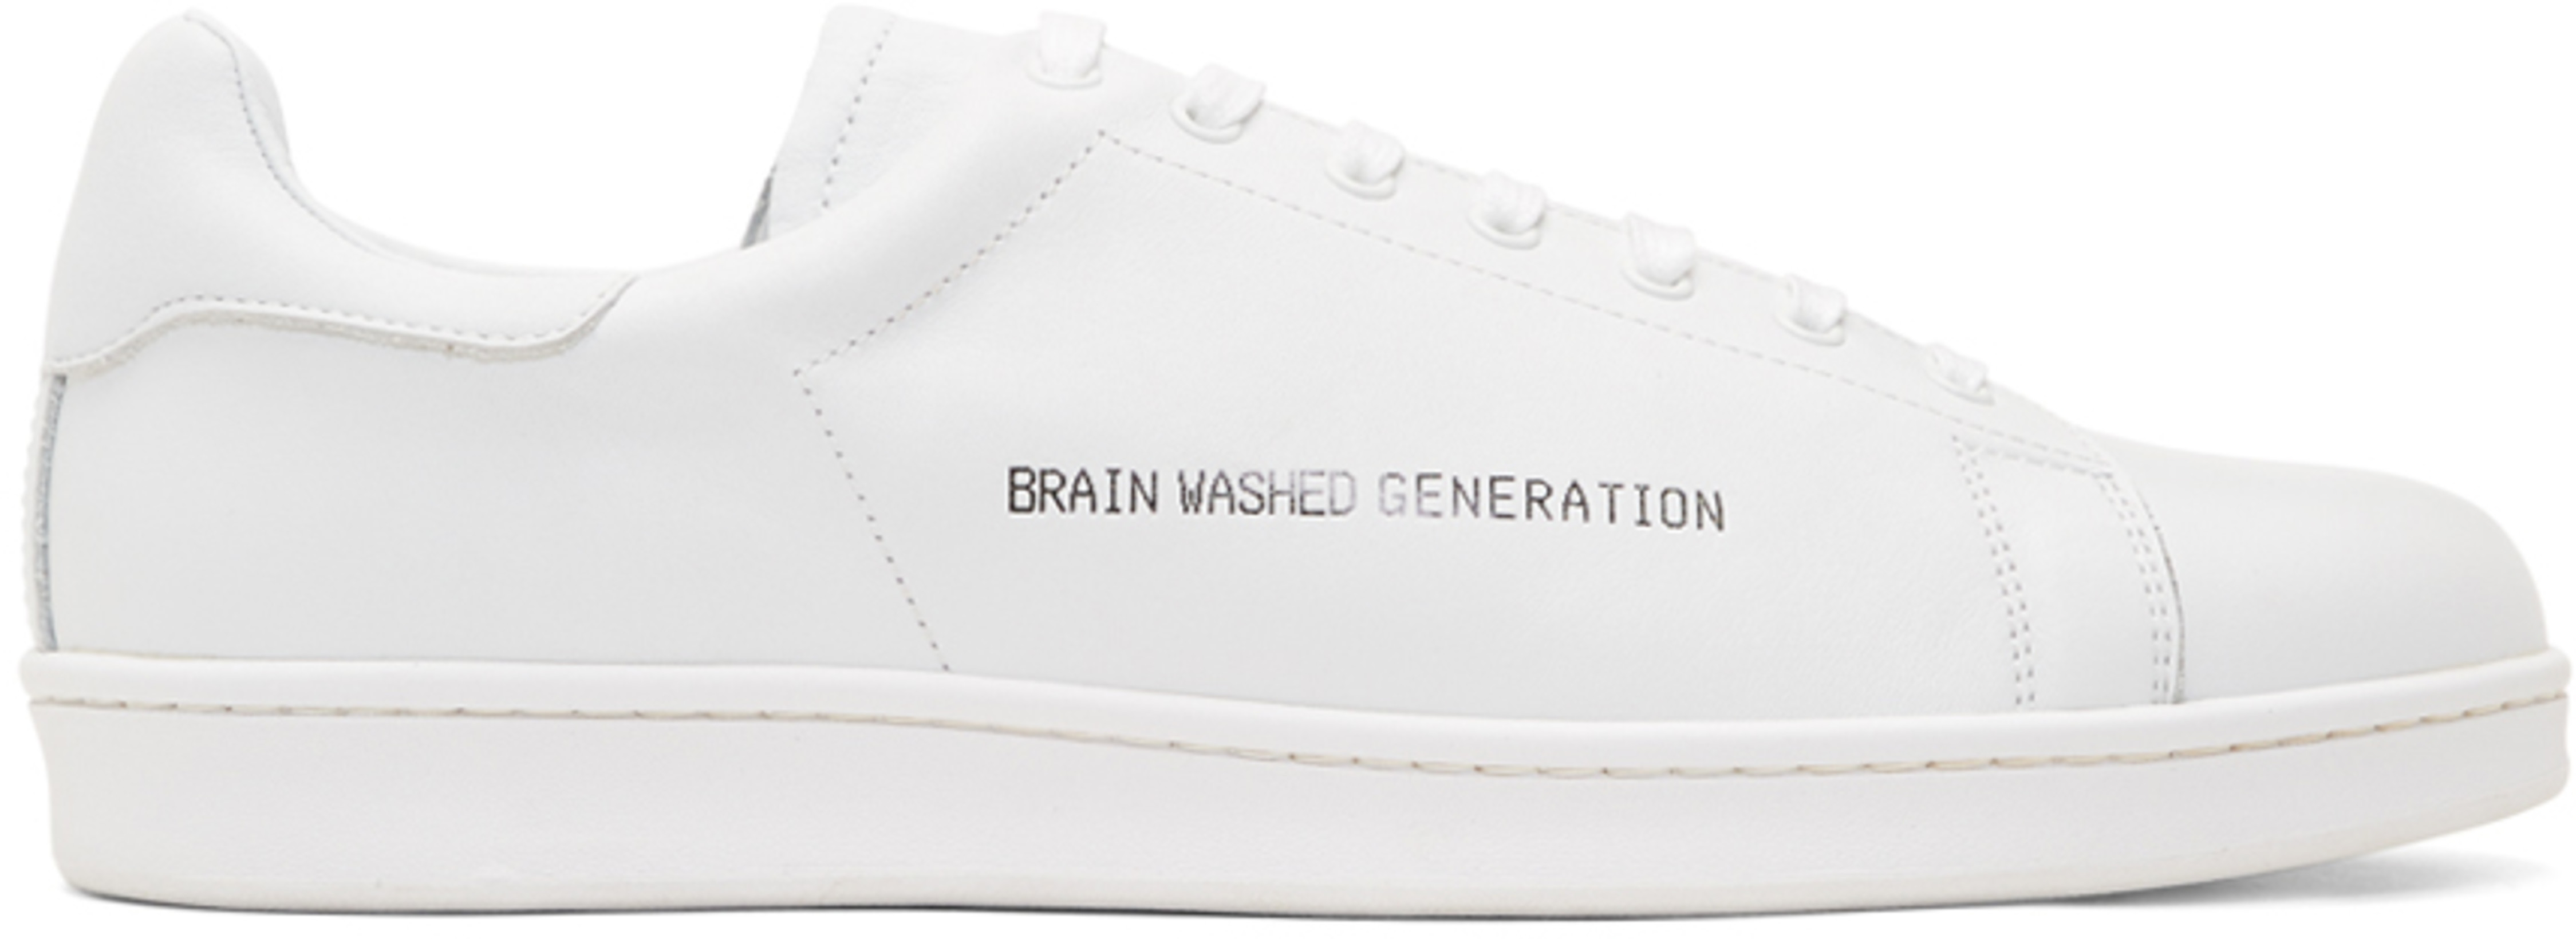 Undercover White "Brainwashed Generation" Sneakers